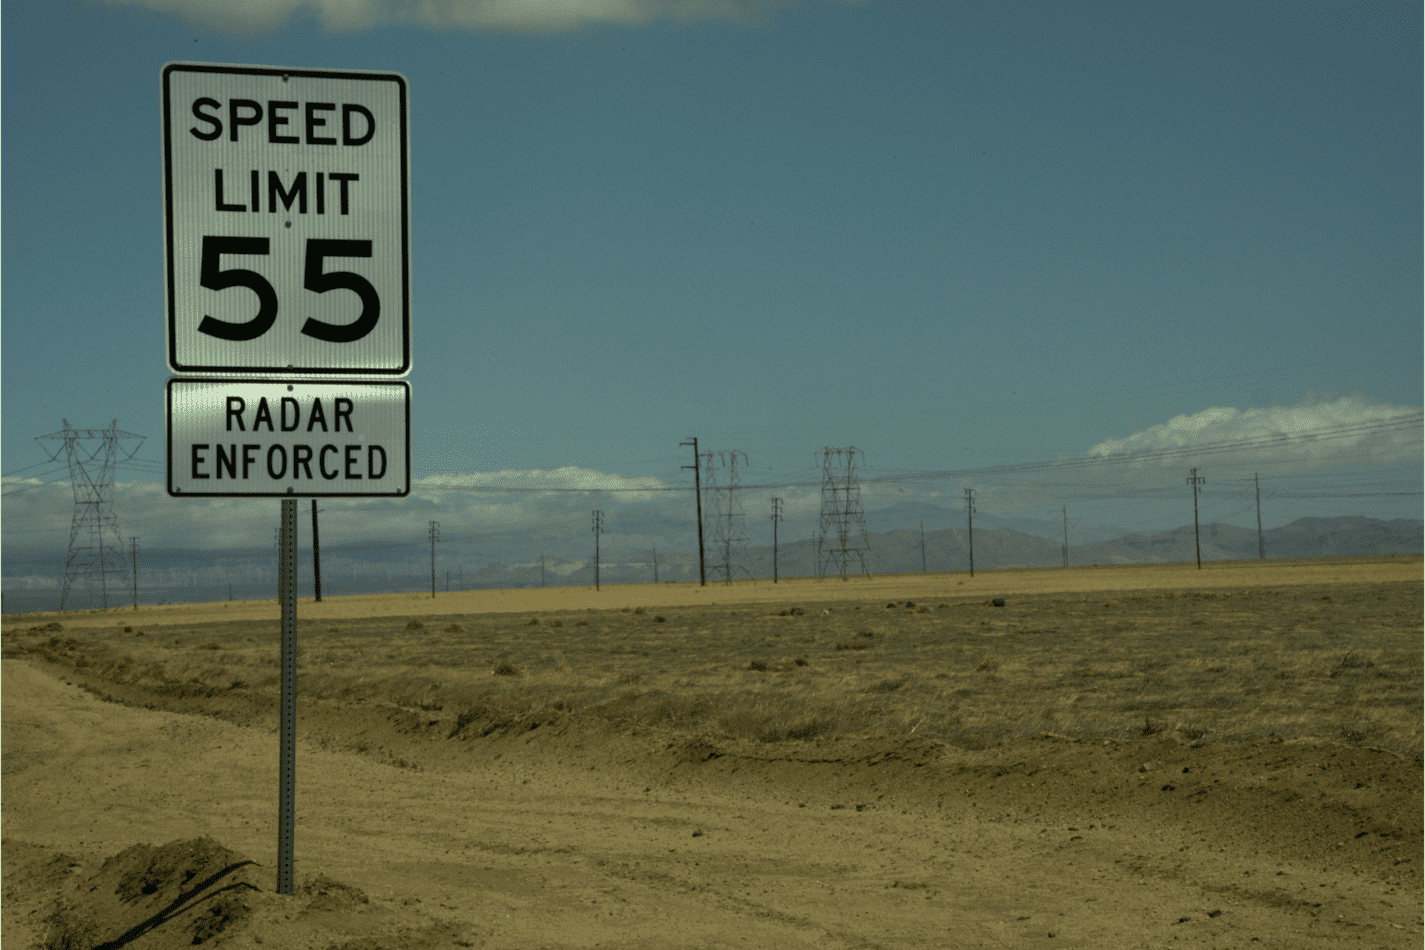 A speed limit enforced by radar sign in middle America.